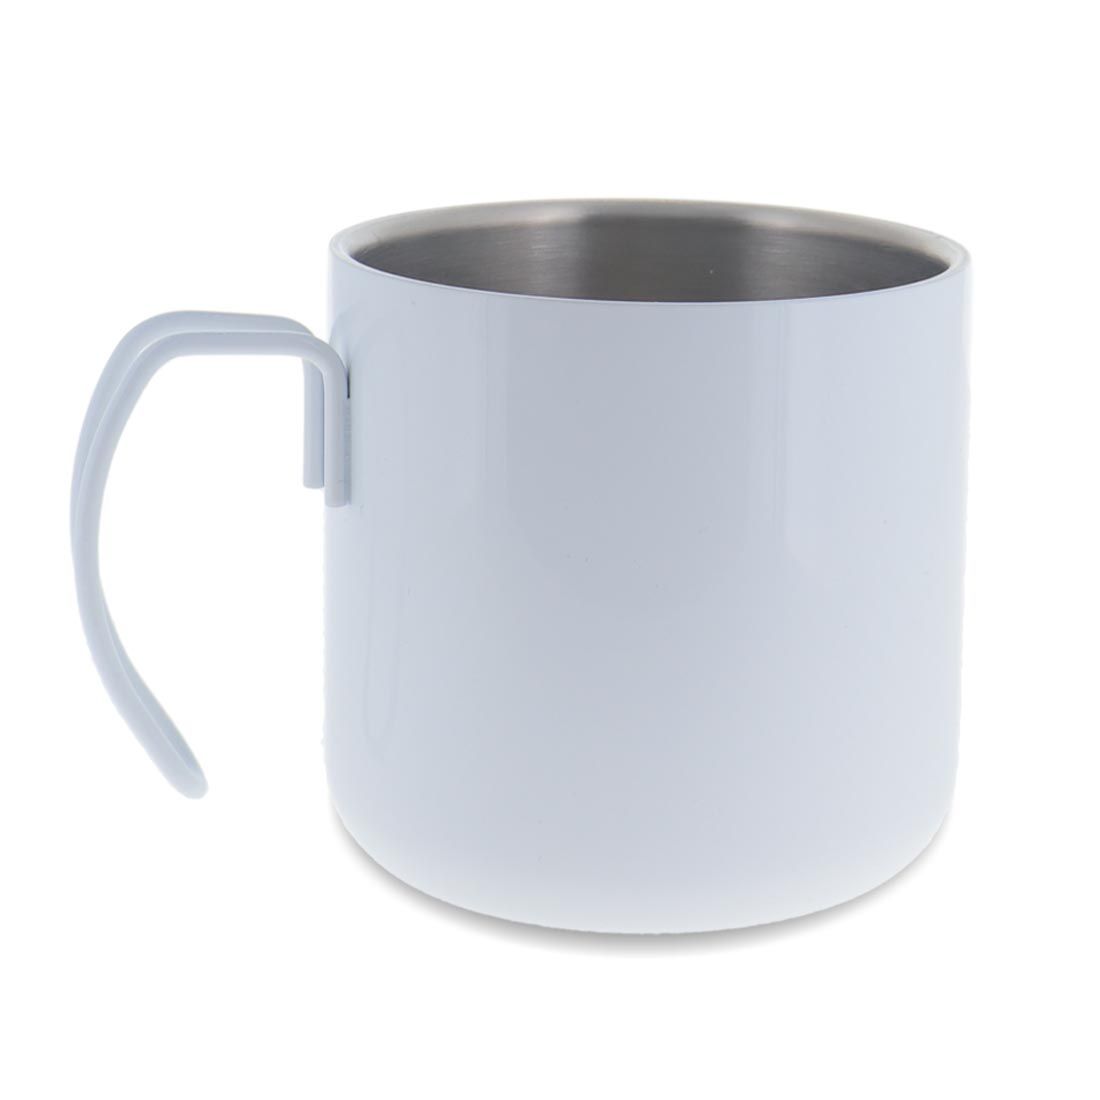 Never Miss the Coolest Sublimation Plated Mugs with Metallic